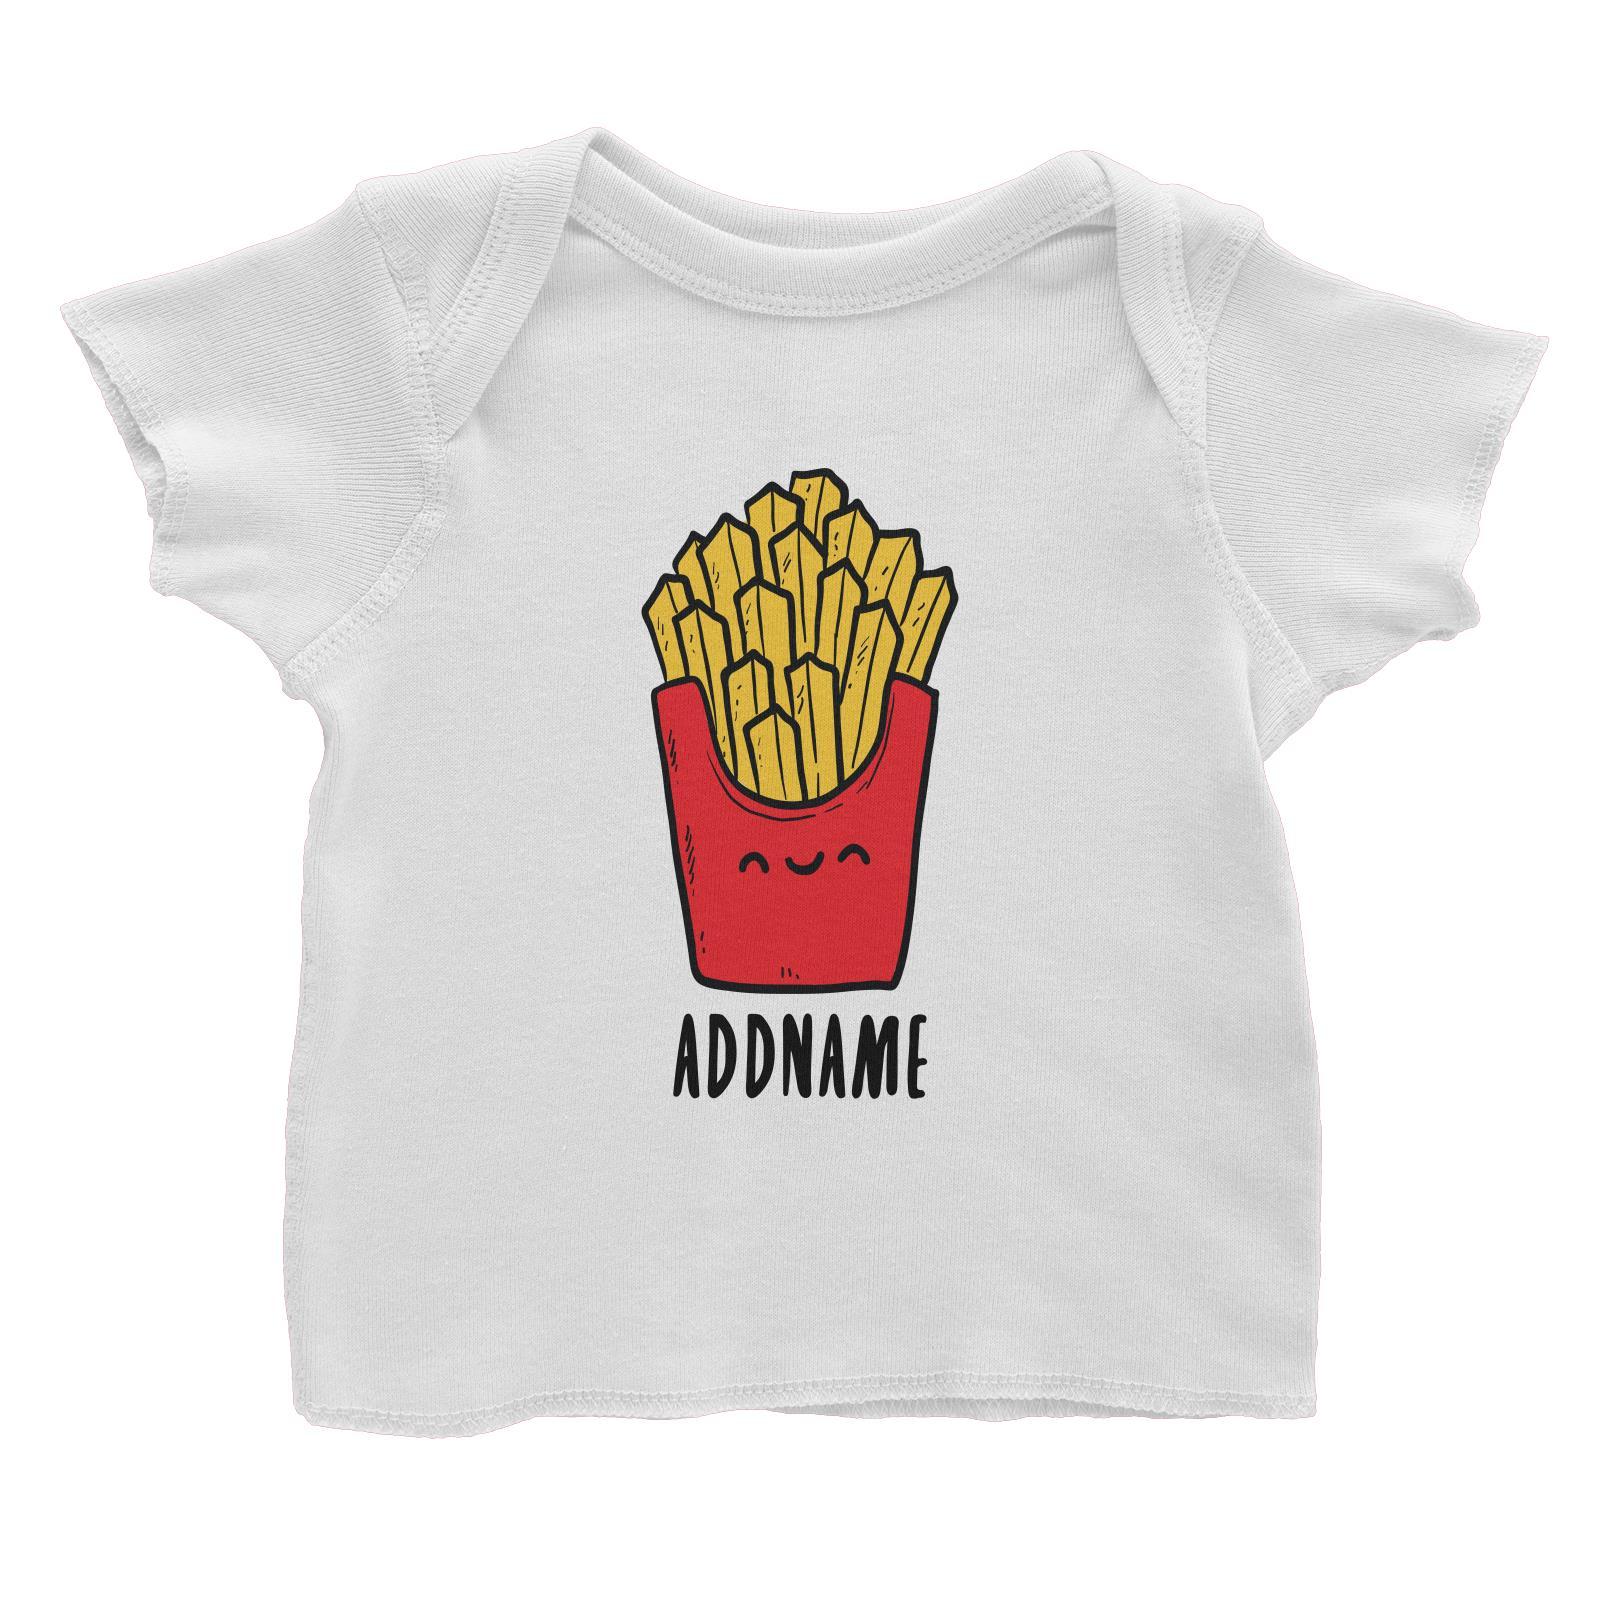 Fast Food Fries Addname Baby T-Shirt  Matching Family Comic Cartoon Personalizable Designs